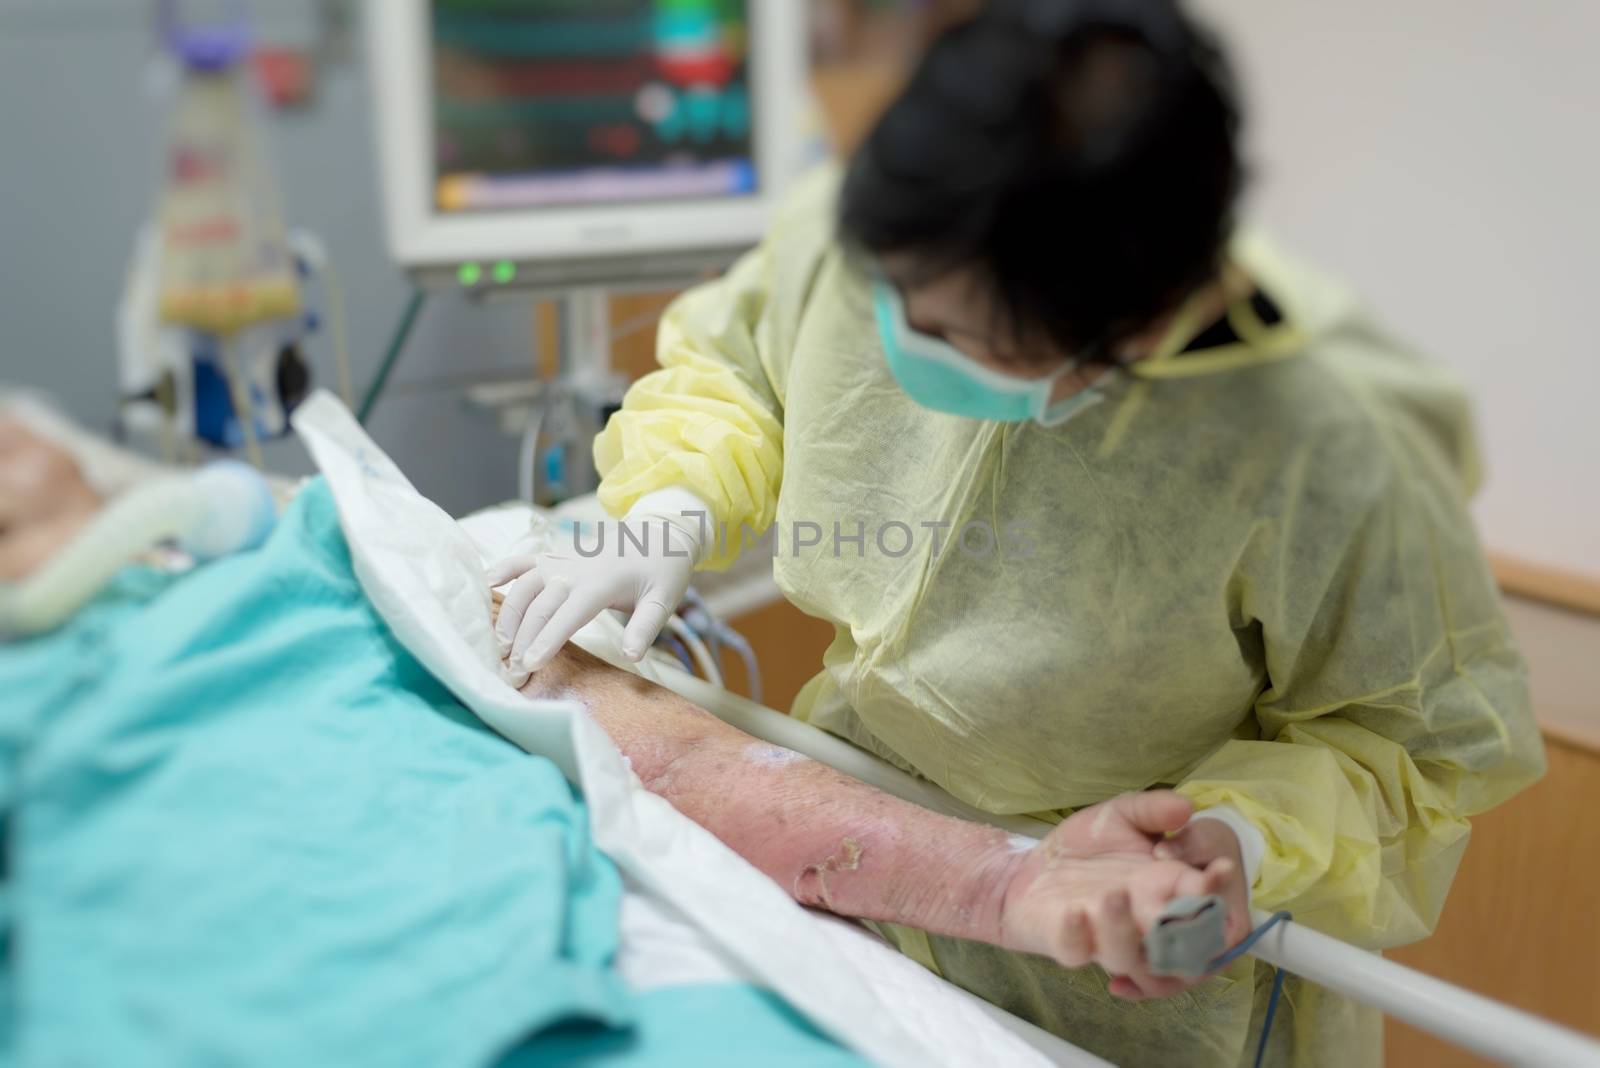 Asian women 40s years old in isolation gown non-sterile coat is a patient relative taking care of the CRE. or VRE. infected elder patient 80s years old on bed in the hospital.